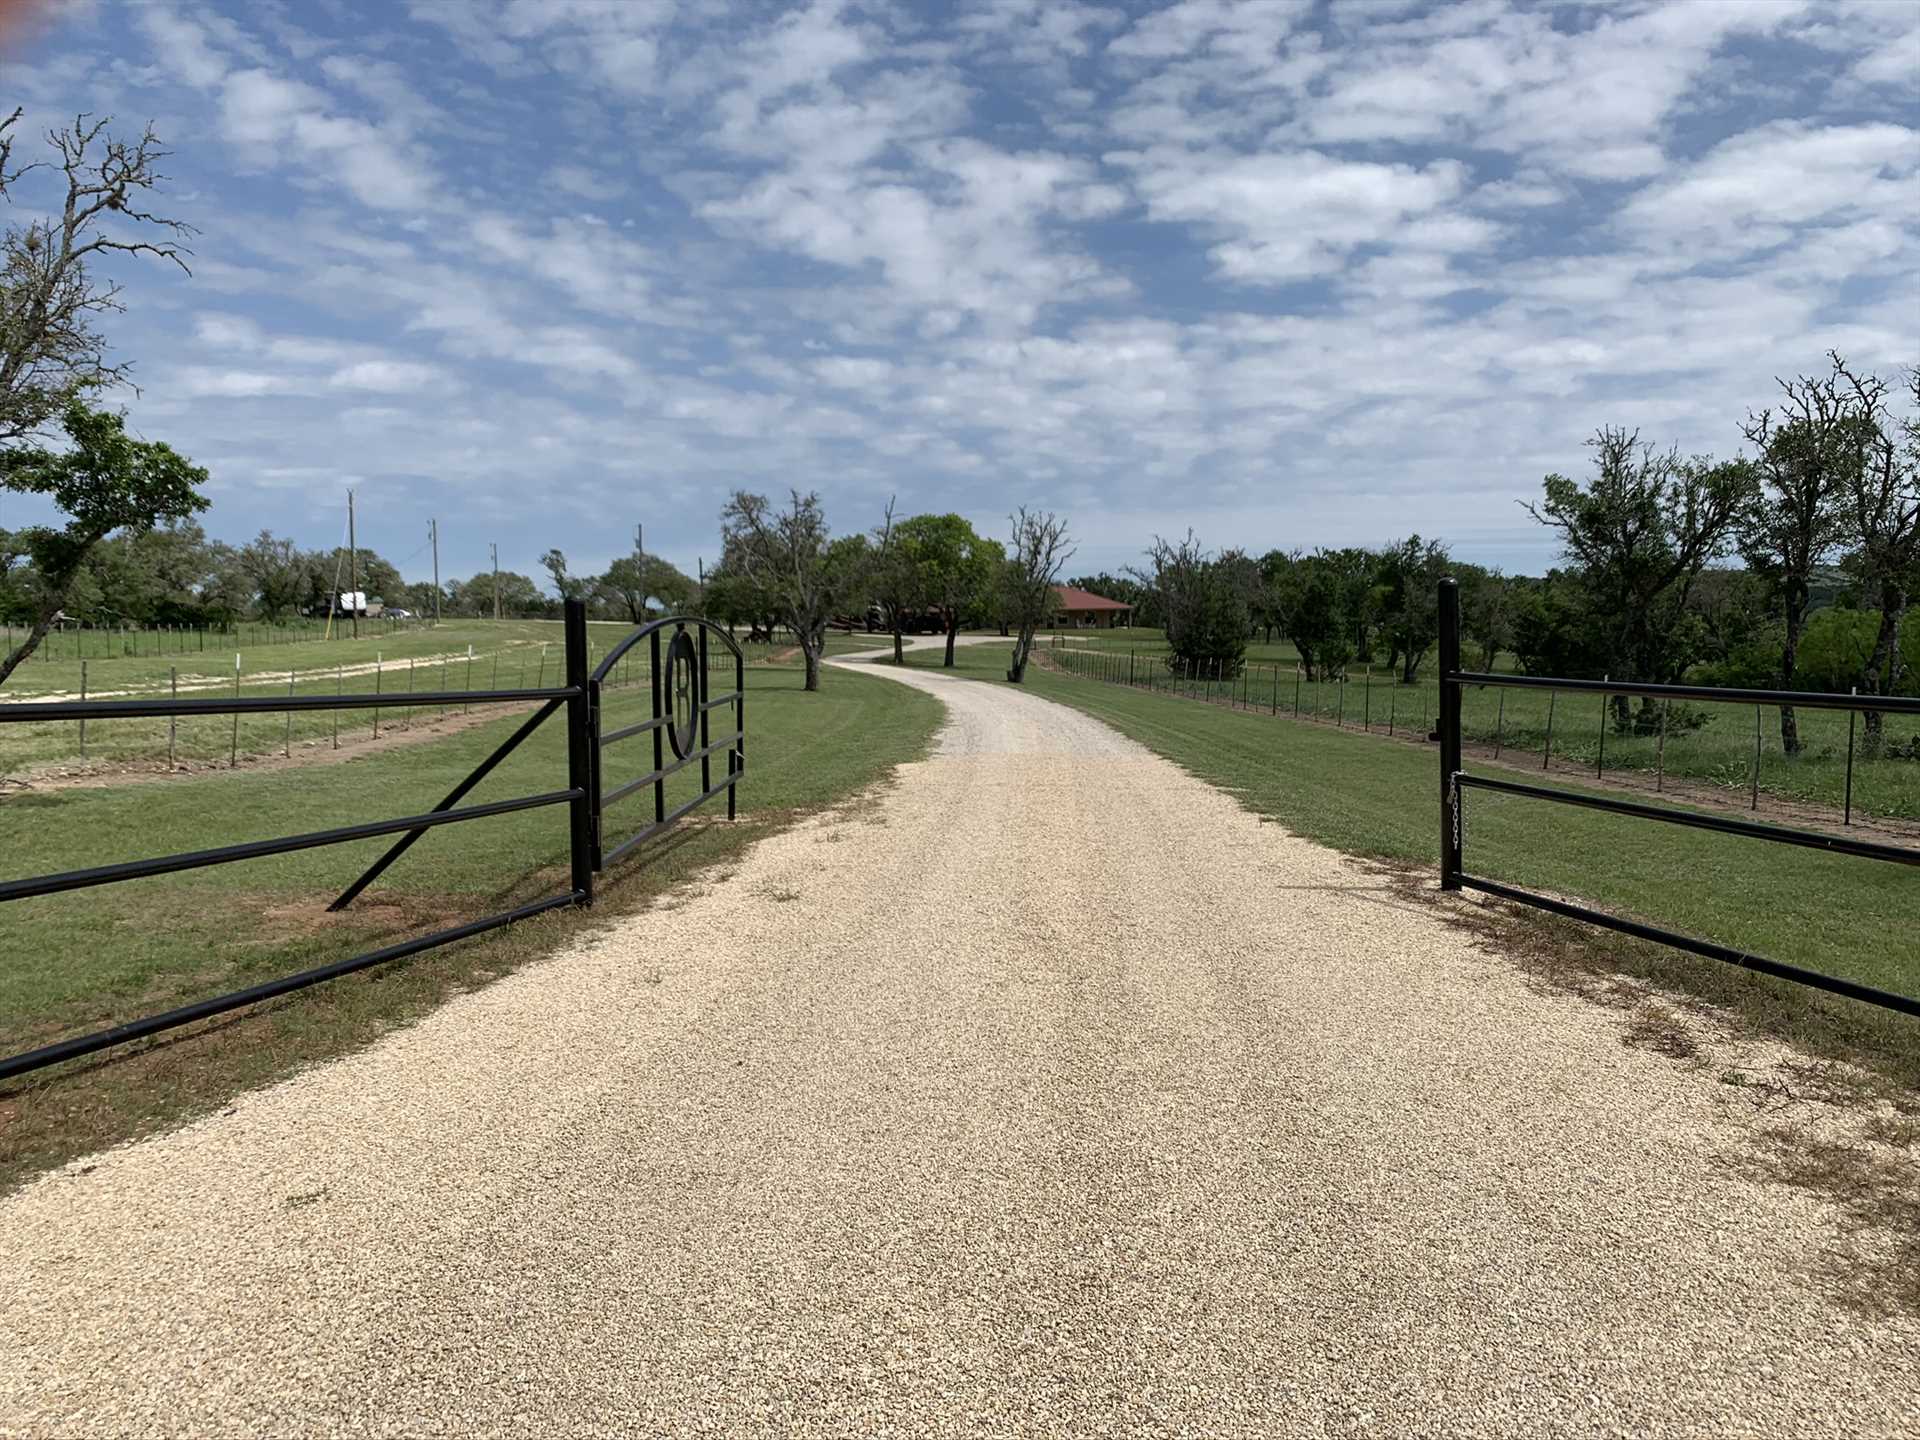                                                 Country roads wind under the wide-open Texas skies here in the Hill Country, and our visitors love to take scenic tours of the region!